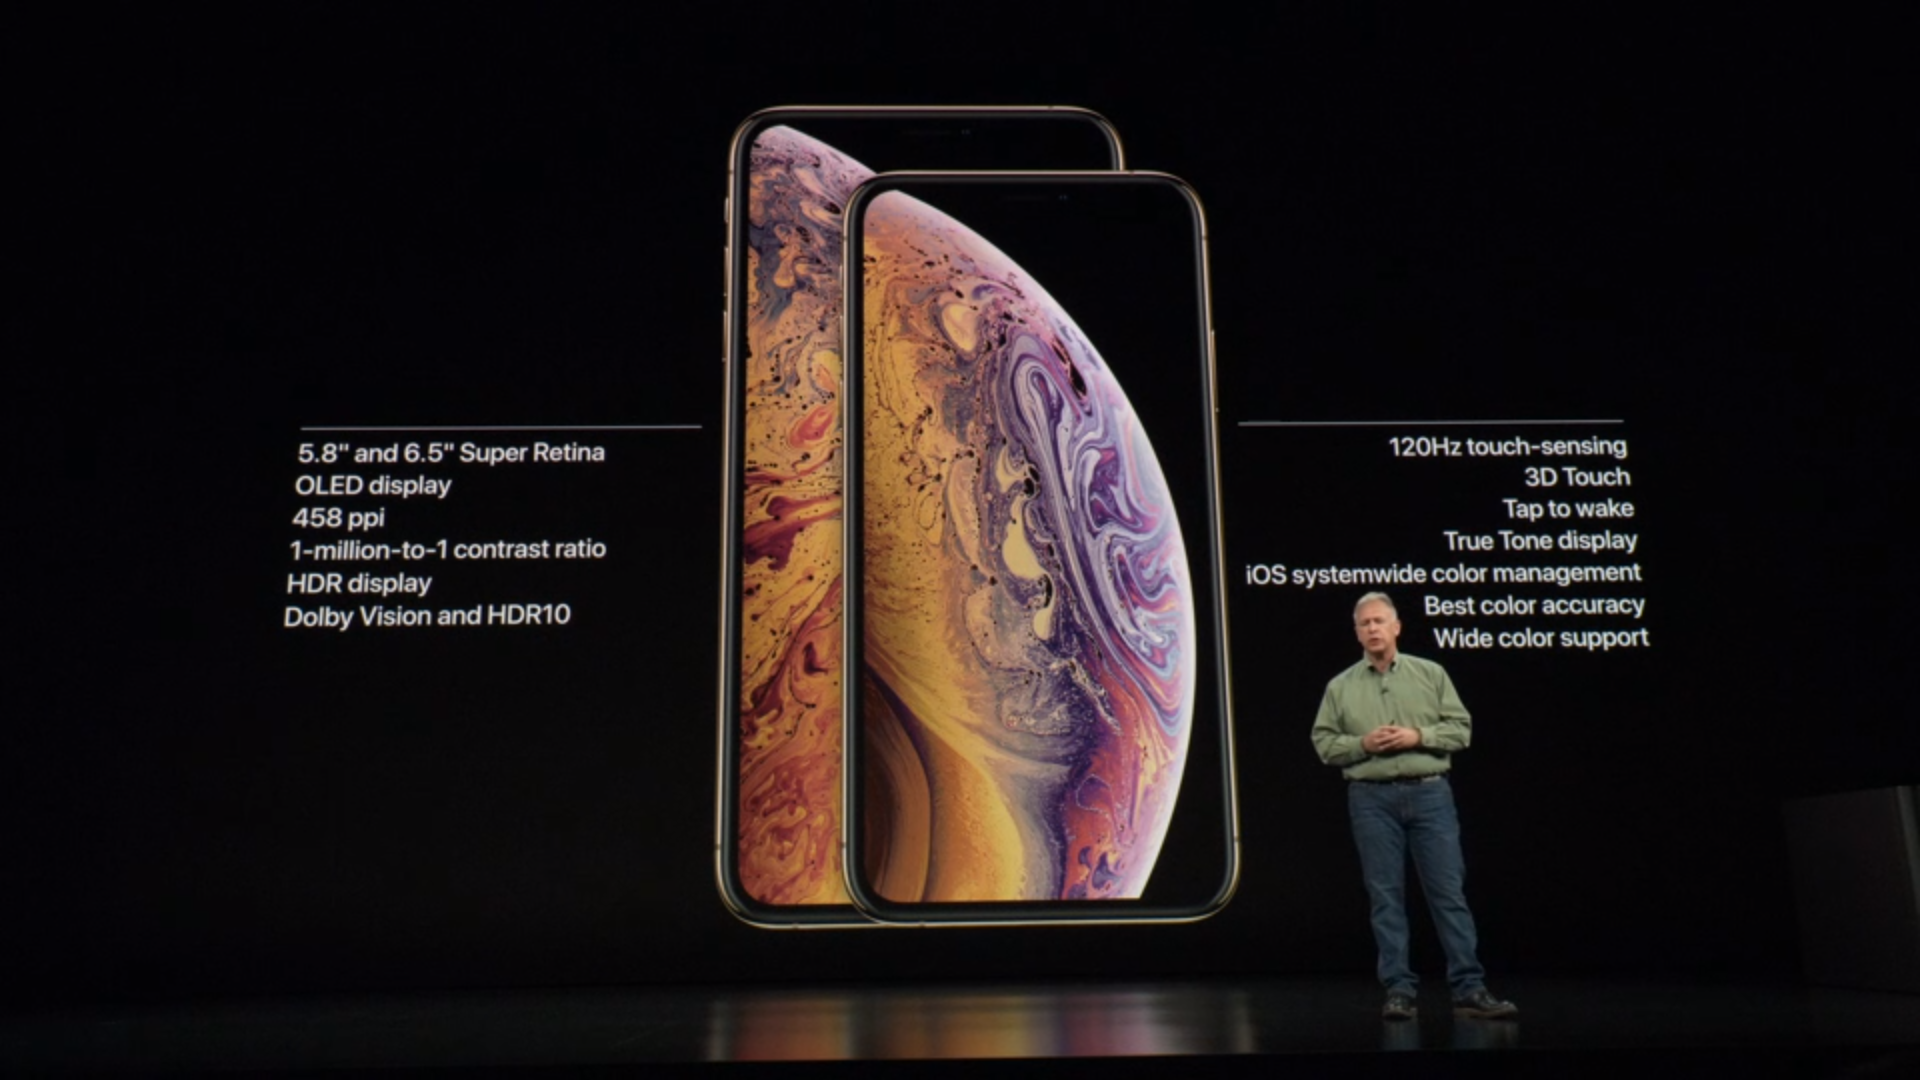 iPhone XS & iPhone XS Max (Source: Apple)